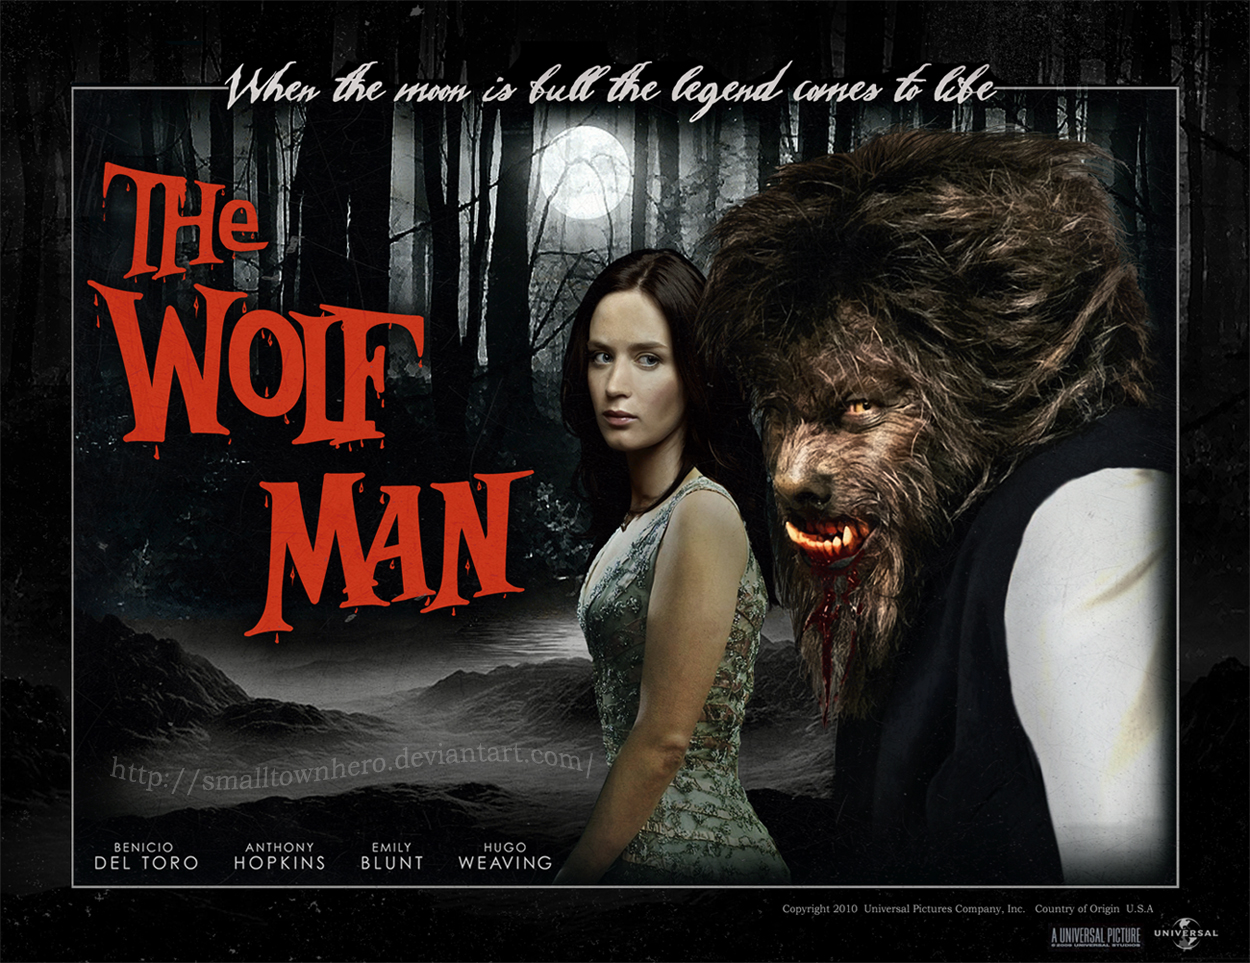 The Wolfman (2010) Wallpapers